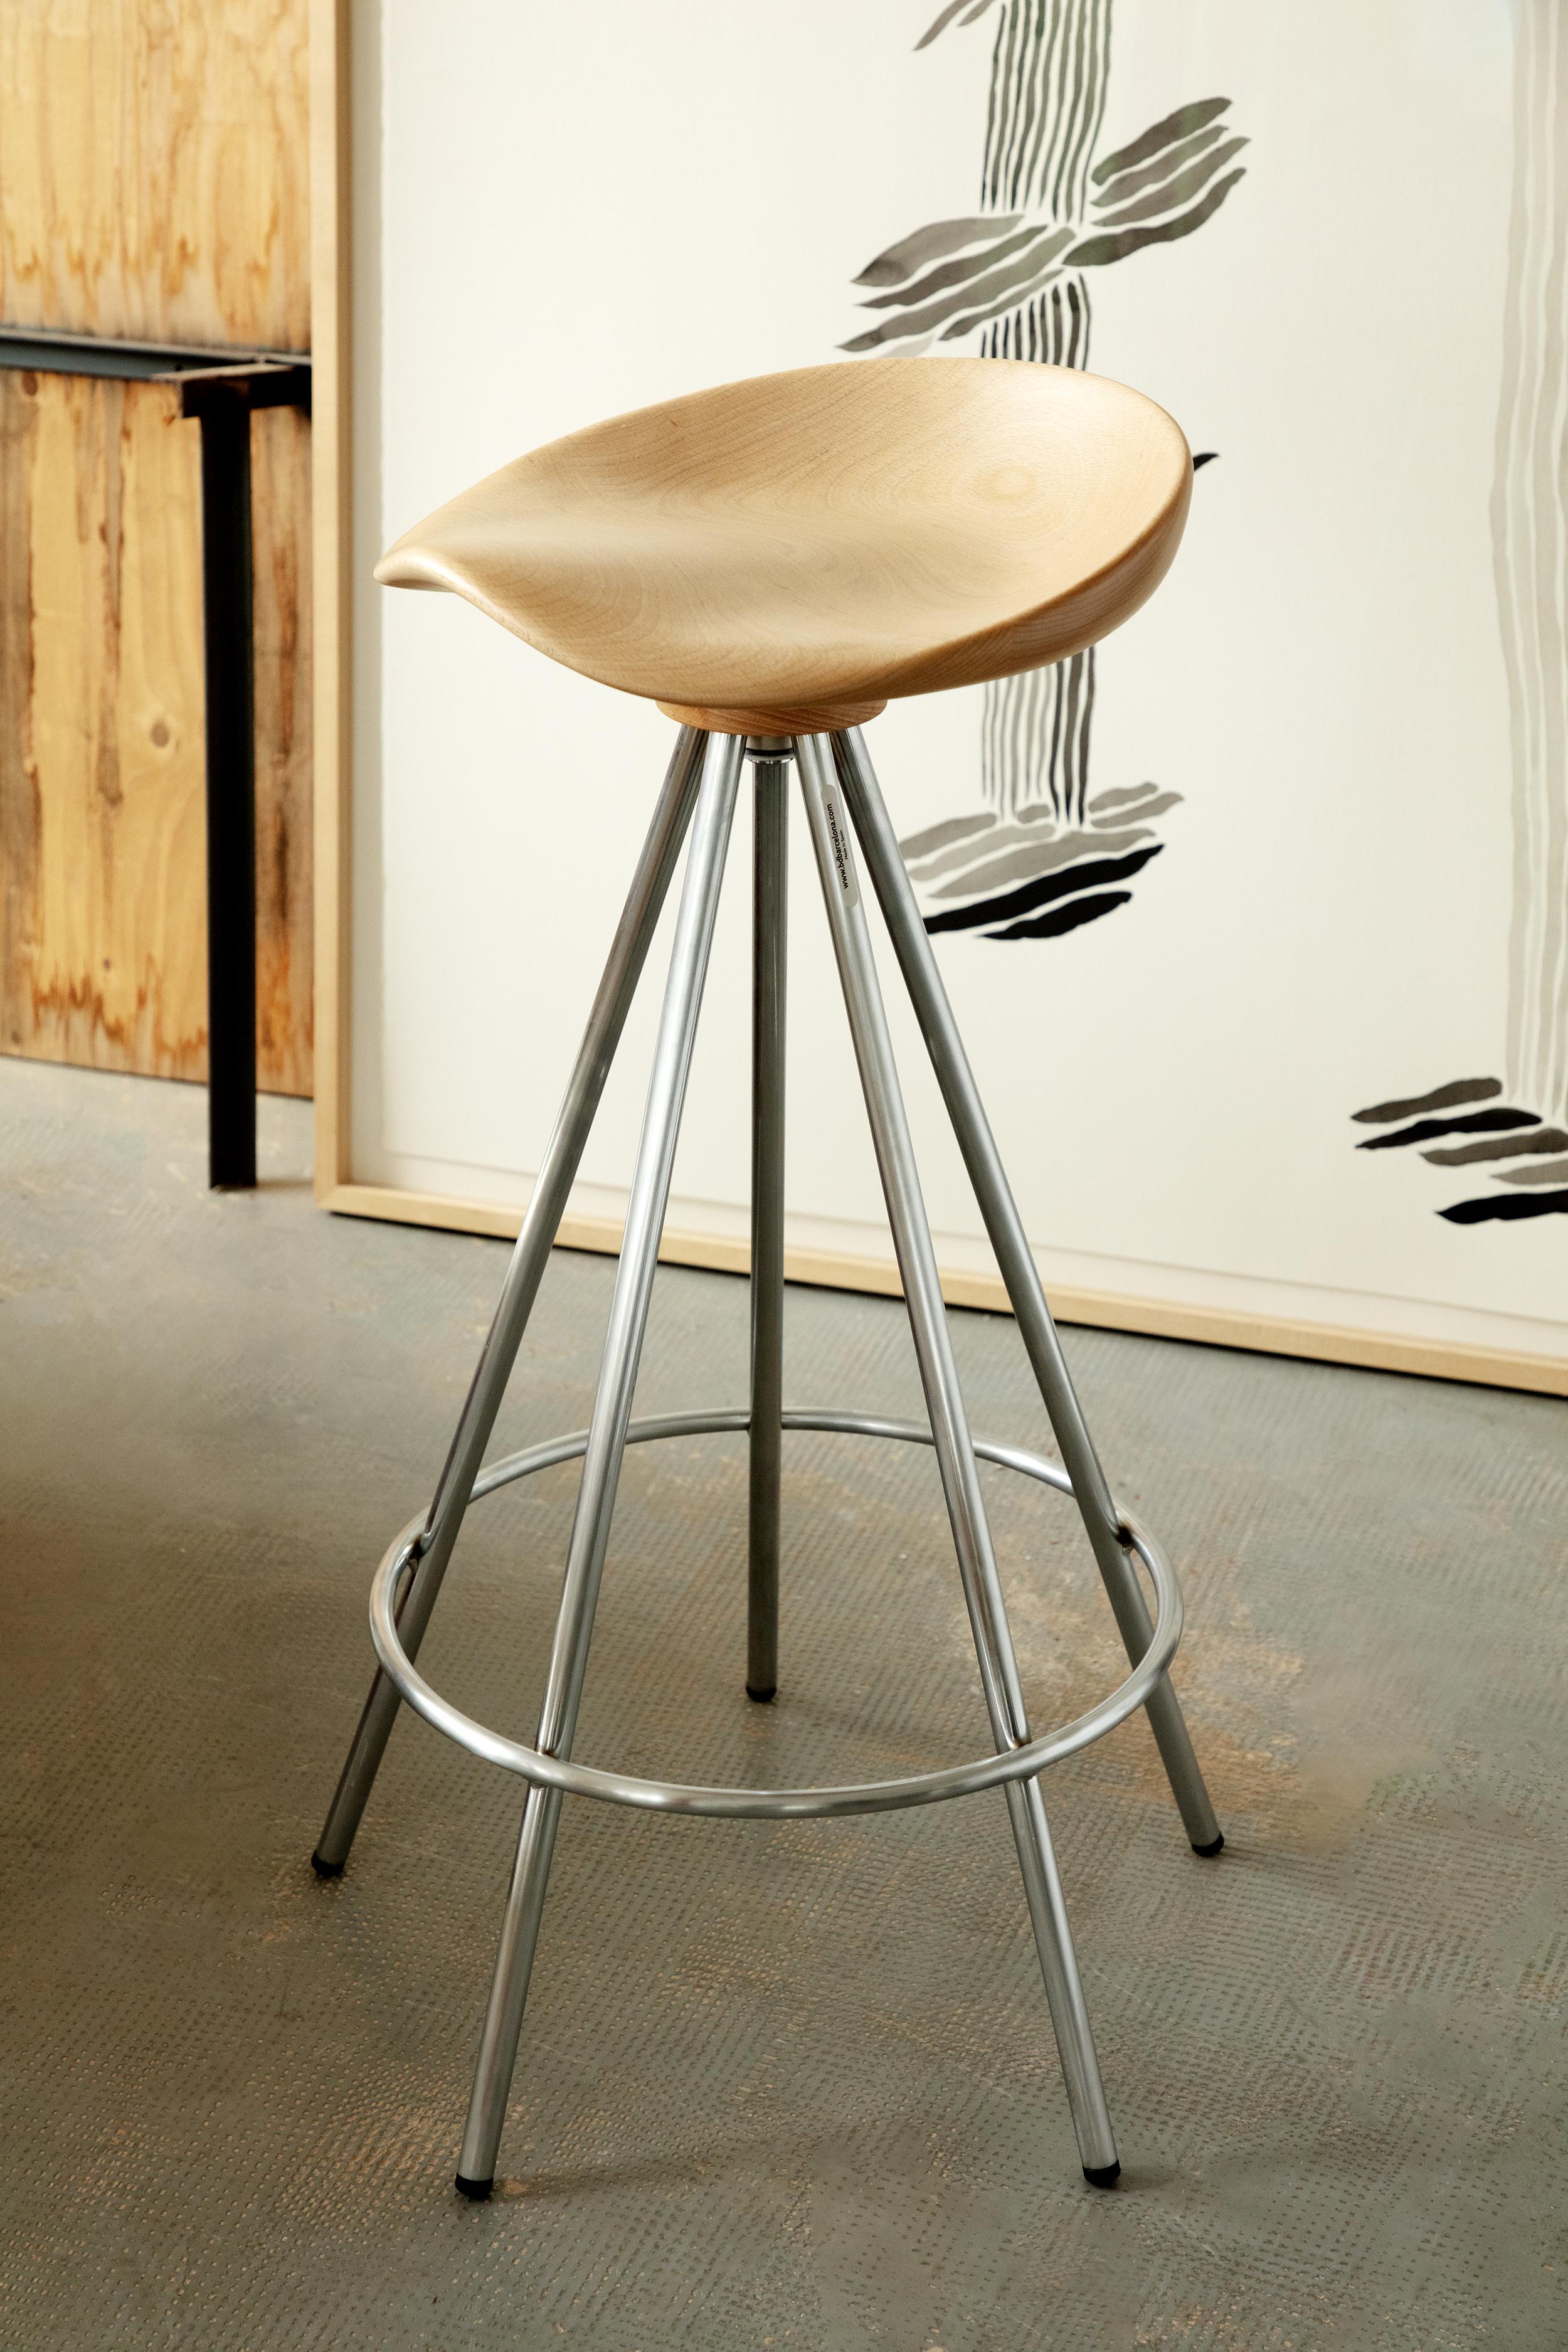 A Pair of Kitchen Counter Stools model 